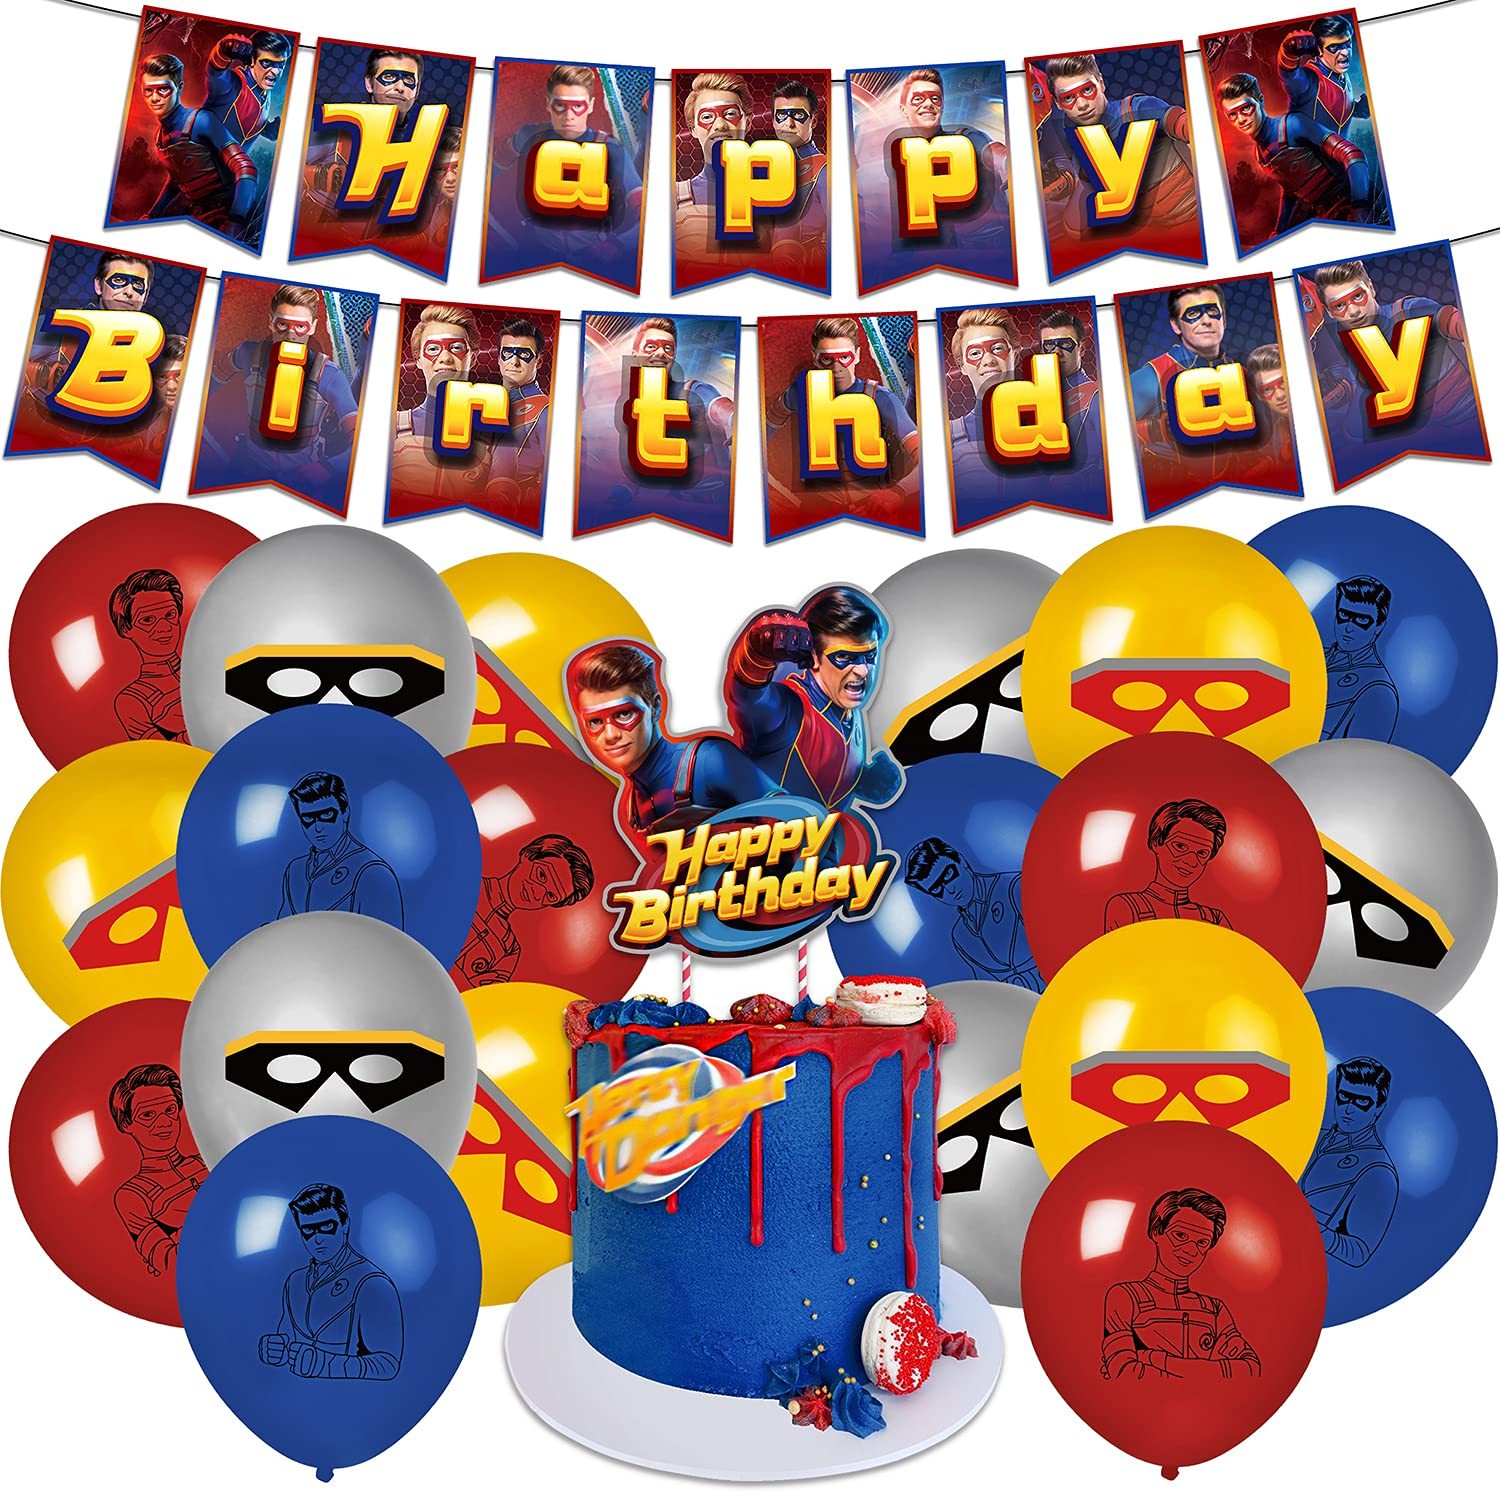 Ebd Products - Henry danger birthday decorations, henry danger party supplies set wit